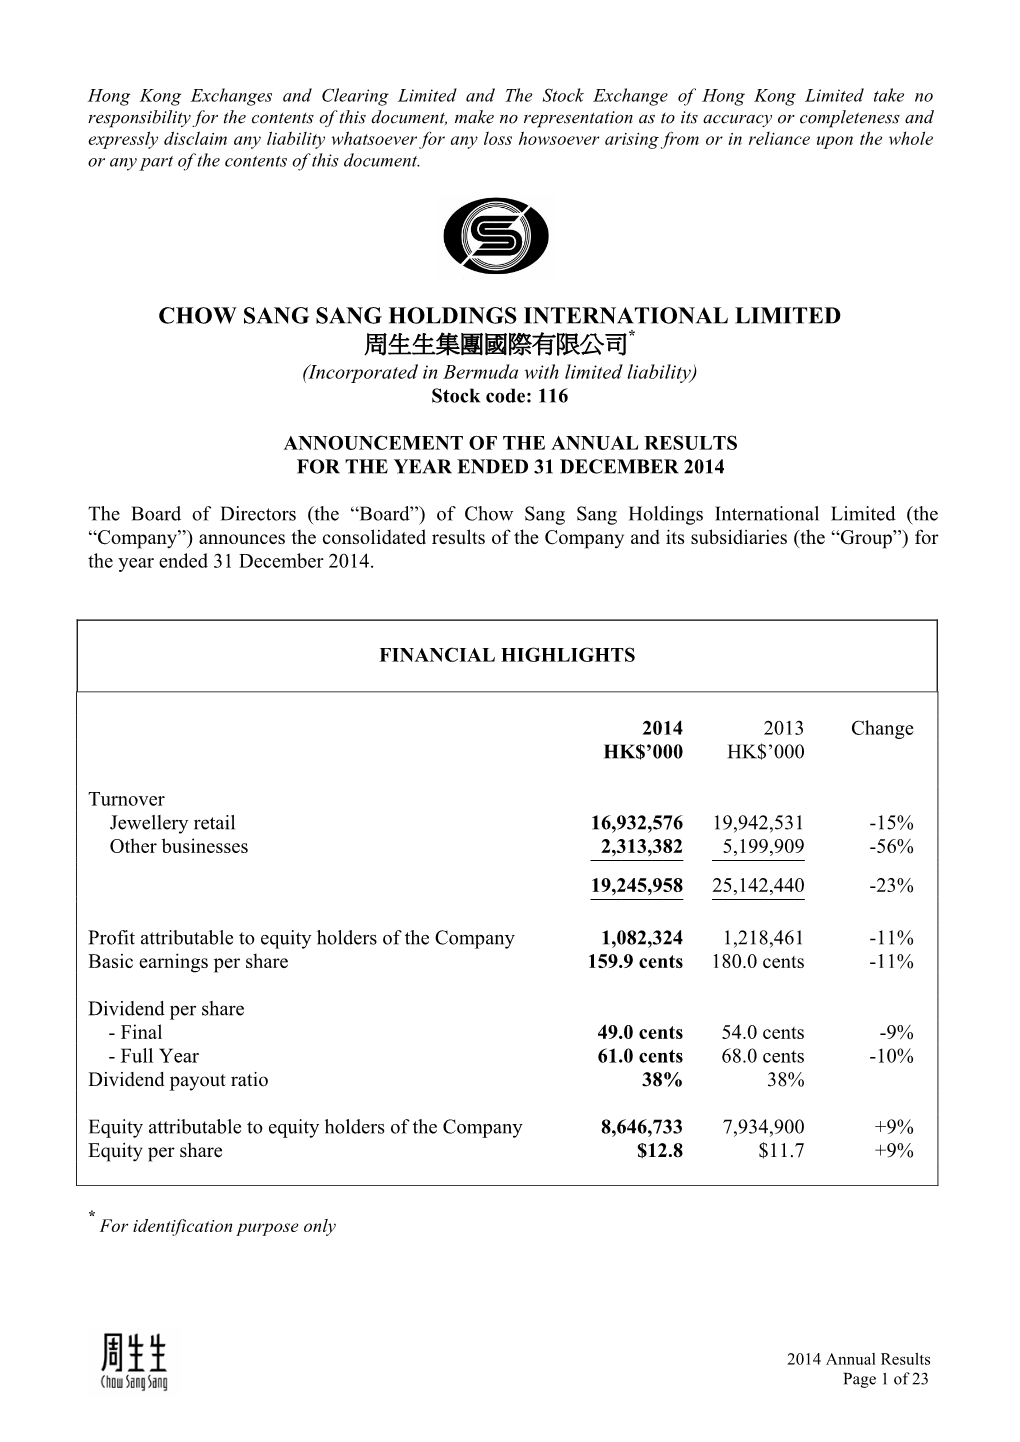 CHOW SANG SANG HOLDINGS INTERNATIONAL LIMITED 周生生集團國際有限公司* (Incorporated in Bermuda with Limited Liability) Stock Code: 116